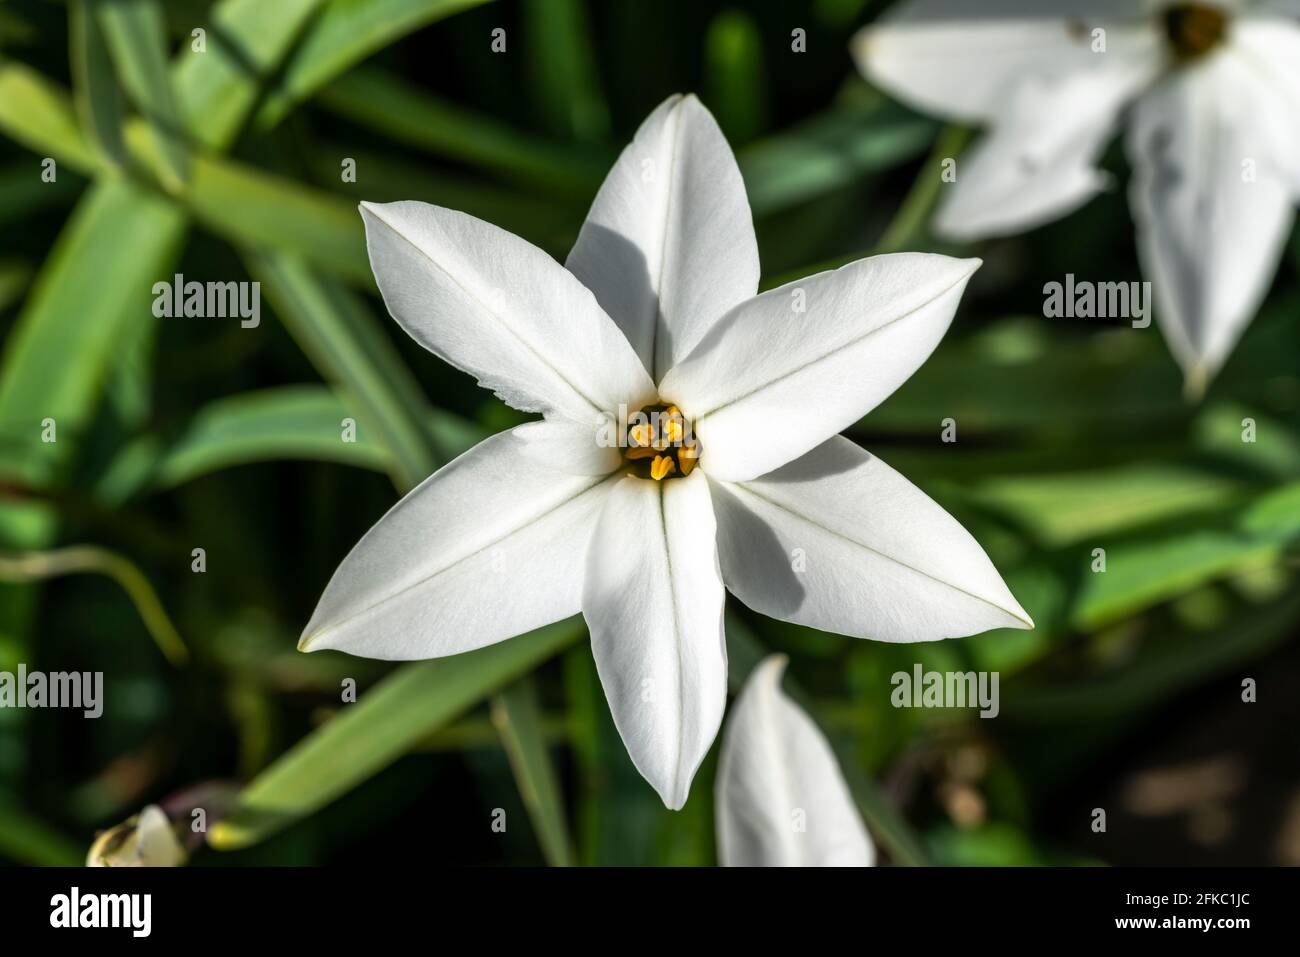 Ipheion 'Alberto Castillo' a spring flowering plant with a white springtime flower commonly known as starflower, stock photo image Stock Photo